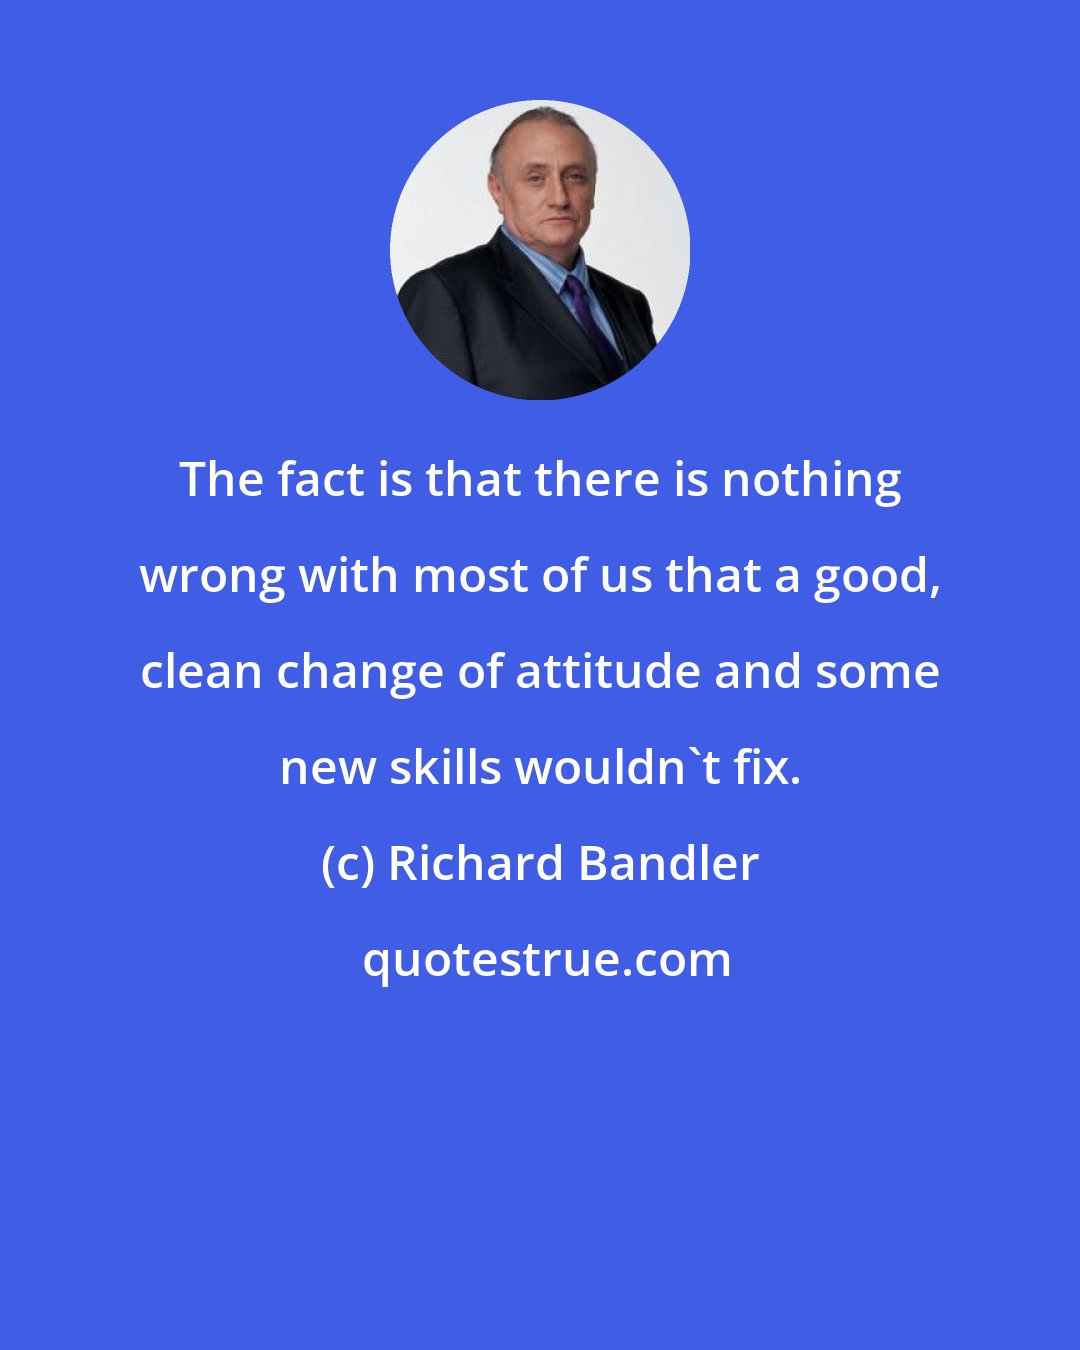 Richard Bandler: The fact is that there is nothing wrong with most of us that a good, clean change of attitude and some new skills wouldn't fix.